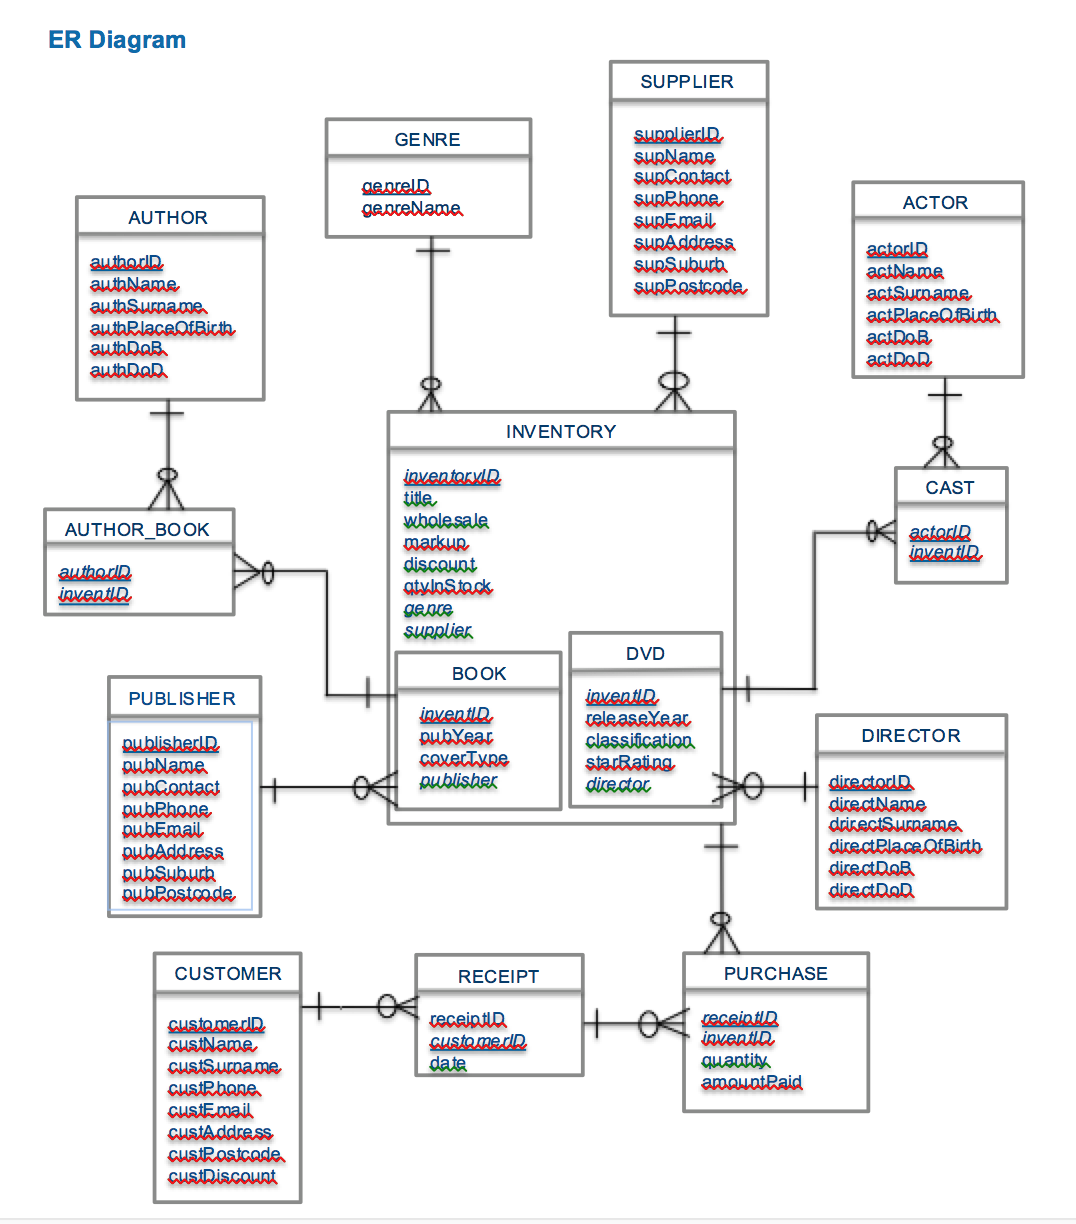 25 References Of Relational Database Schema Diagram